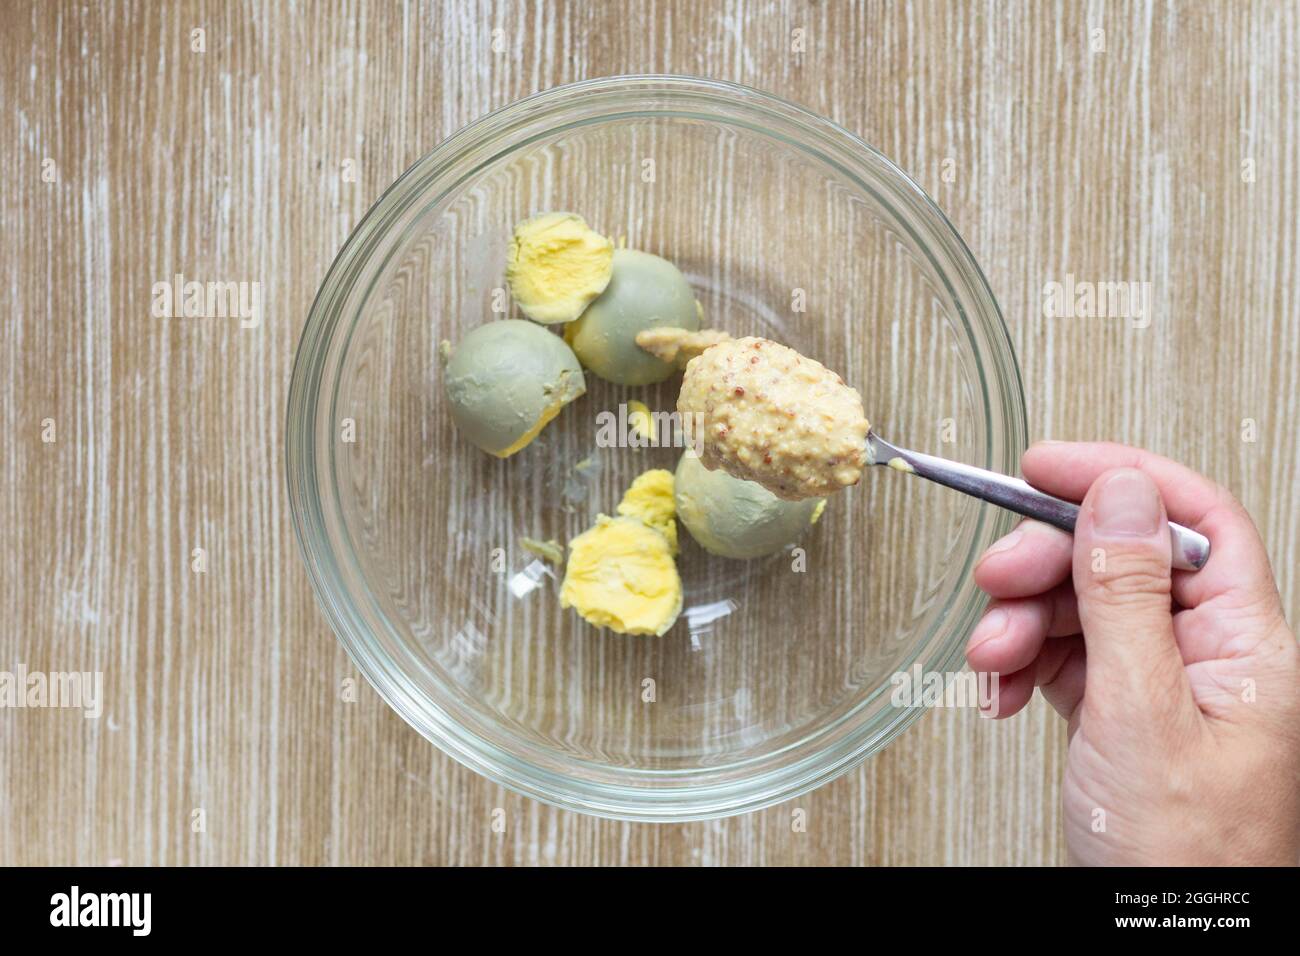 Top view of woman hand holding spoon with mustard to put it into boiled yolks in glass bowl for making flavoring for okroshka Stock Photo